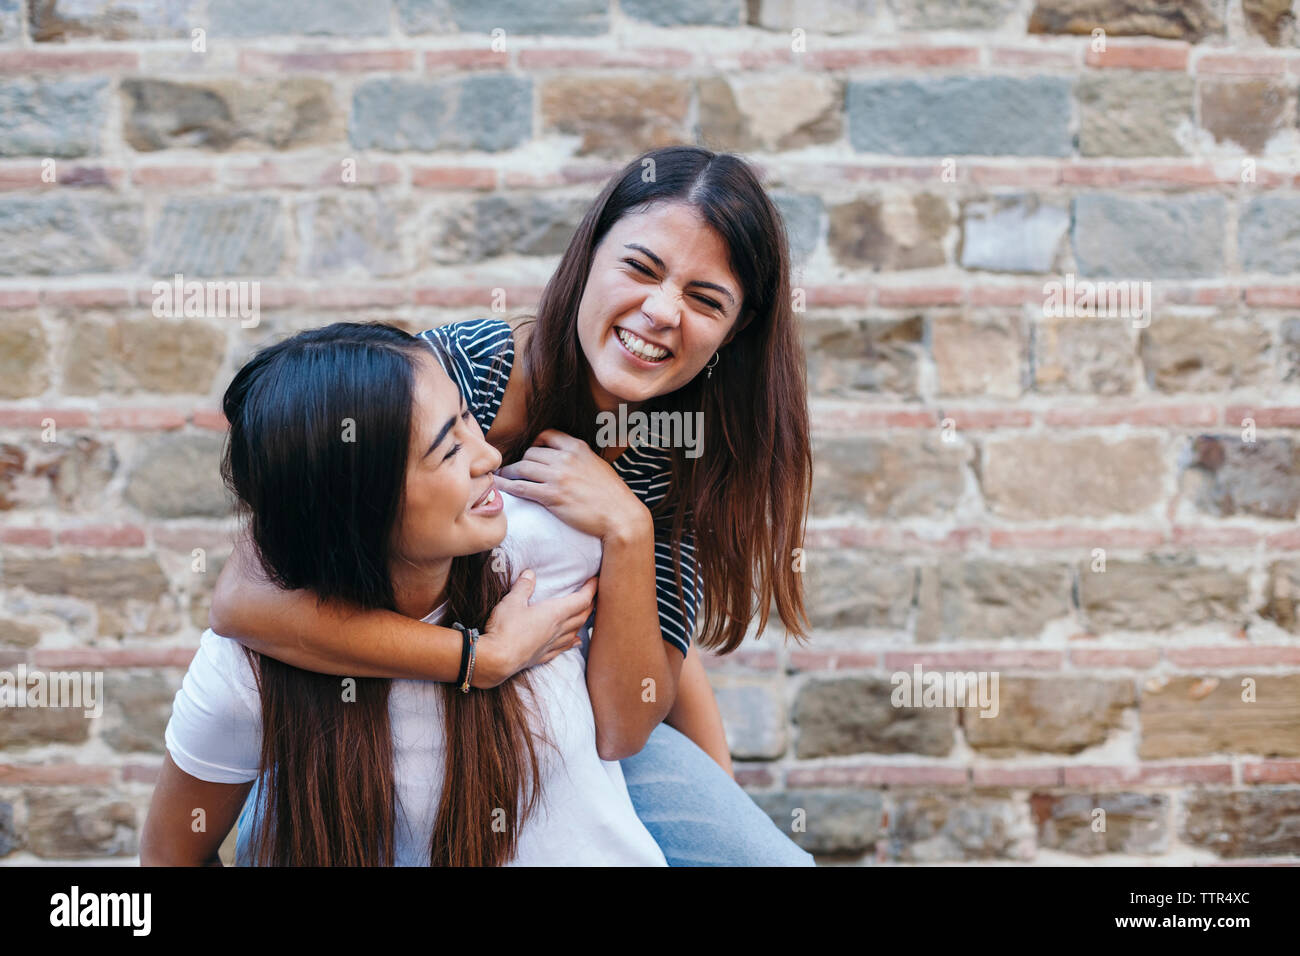 Woman piggybacking happy friend while standing by wall Stock Photo